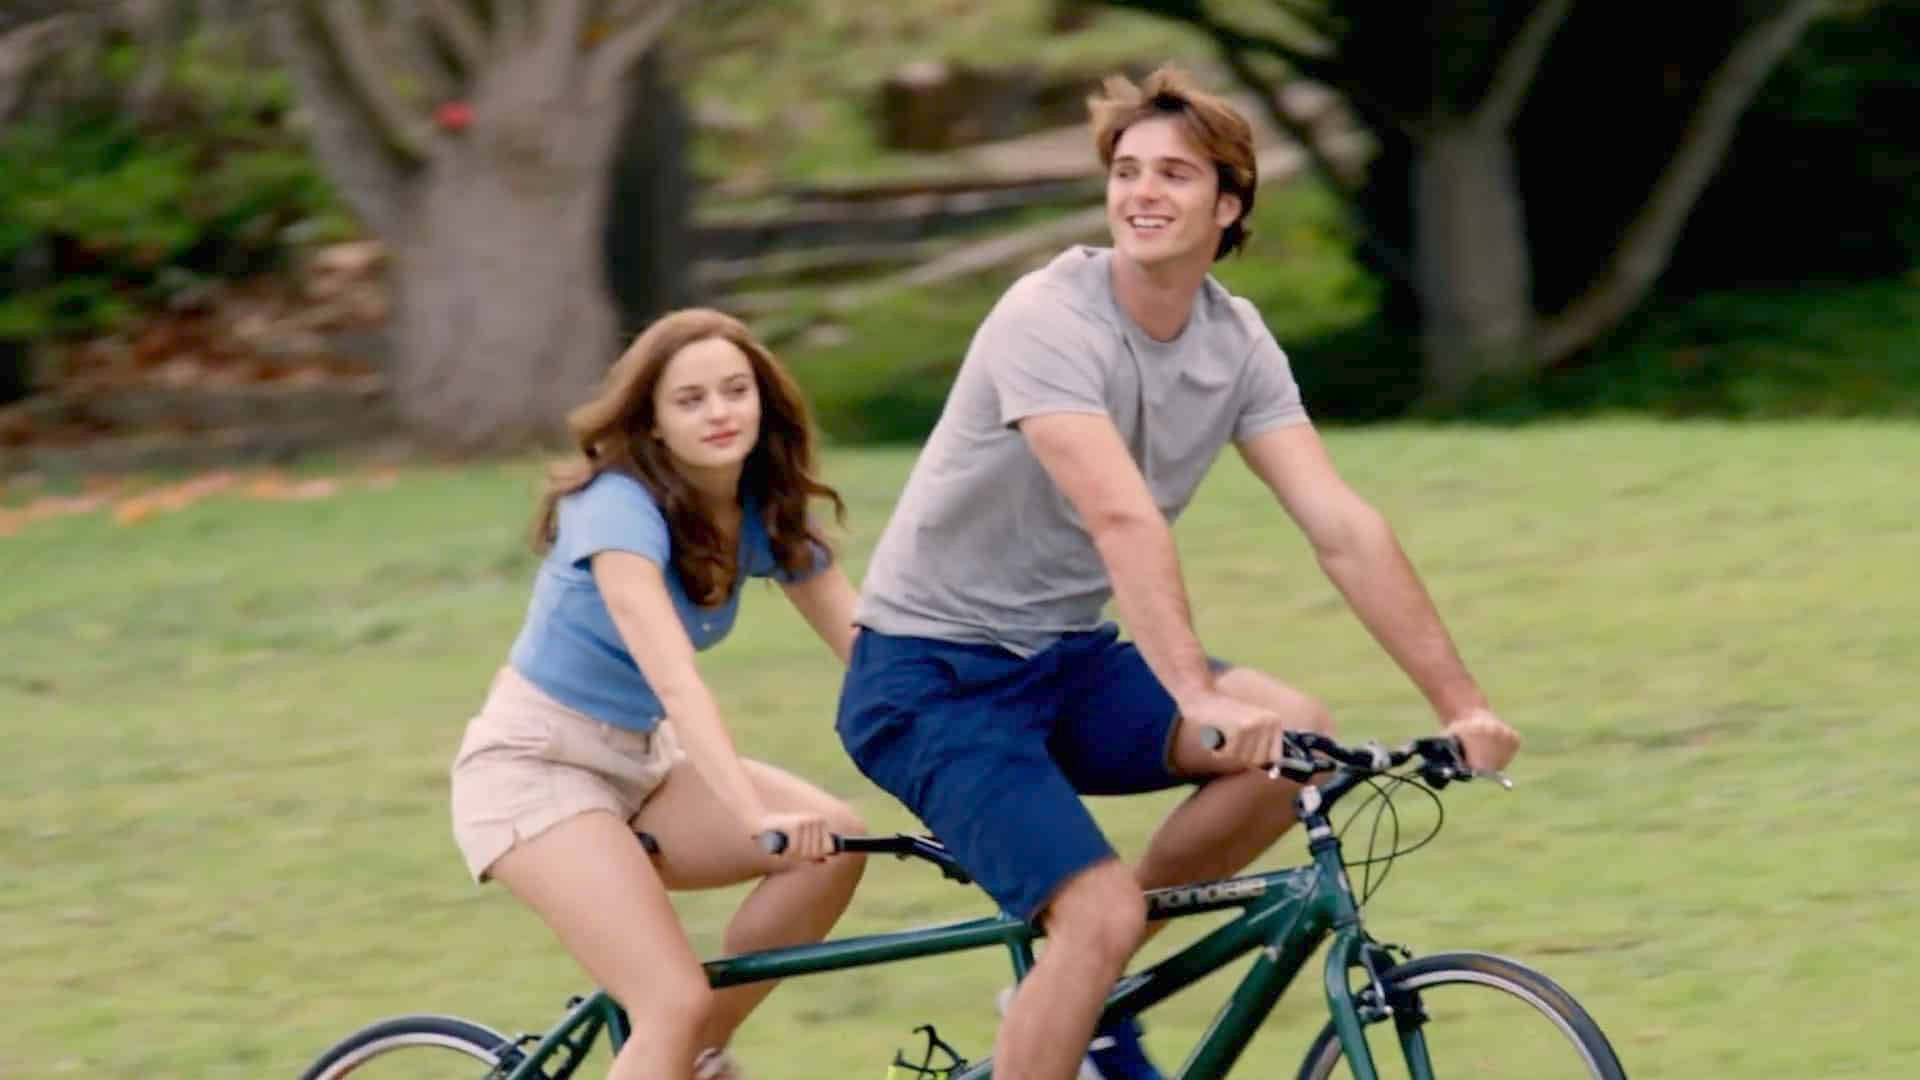 The Kissing Booth Tandem Bicycle Scene Background